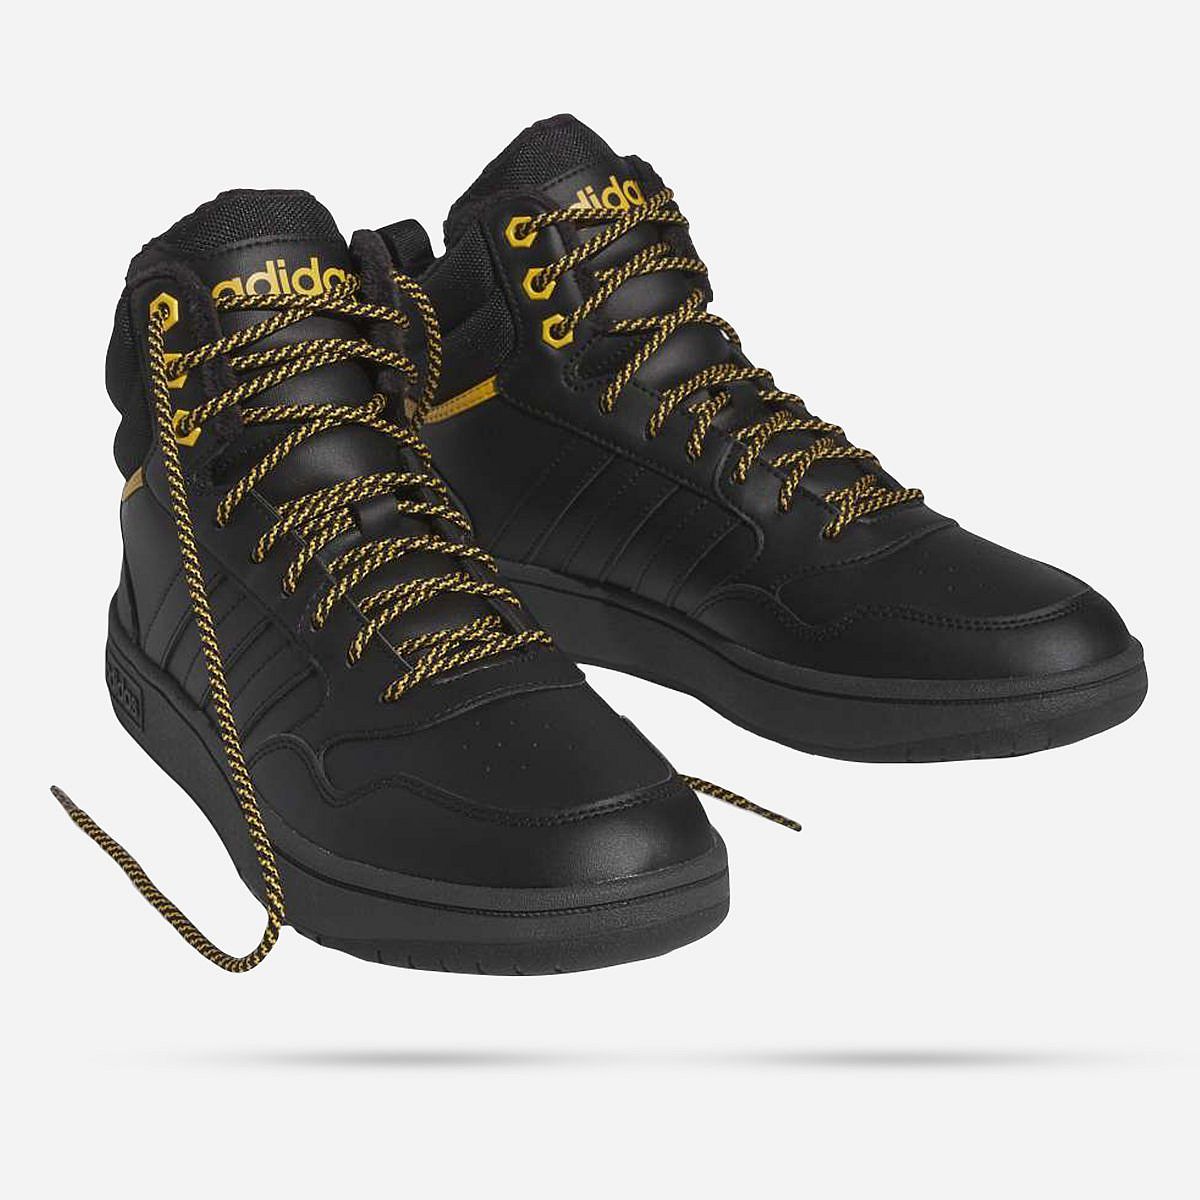 AN305474 Hoops 3.0 Mid Lifestyle Basketball Classic Winters